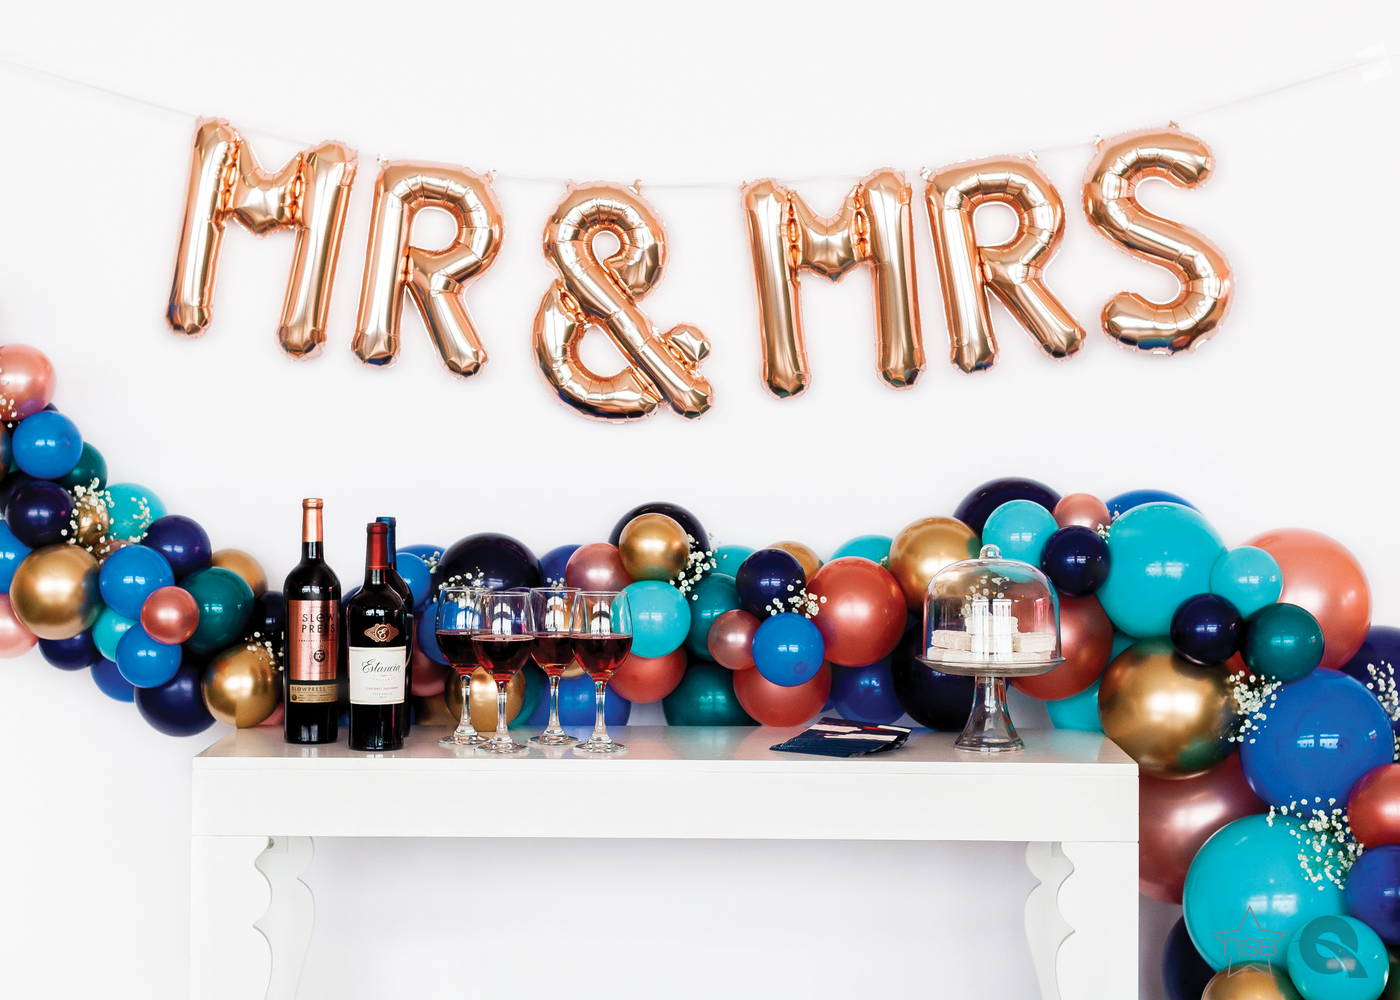 Air-filled, Non-floating MR(S) and MR(S) Wedding Balloon Banner Kit